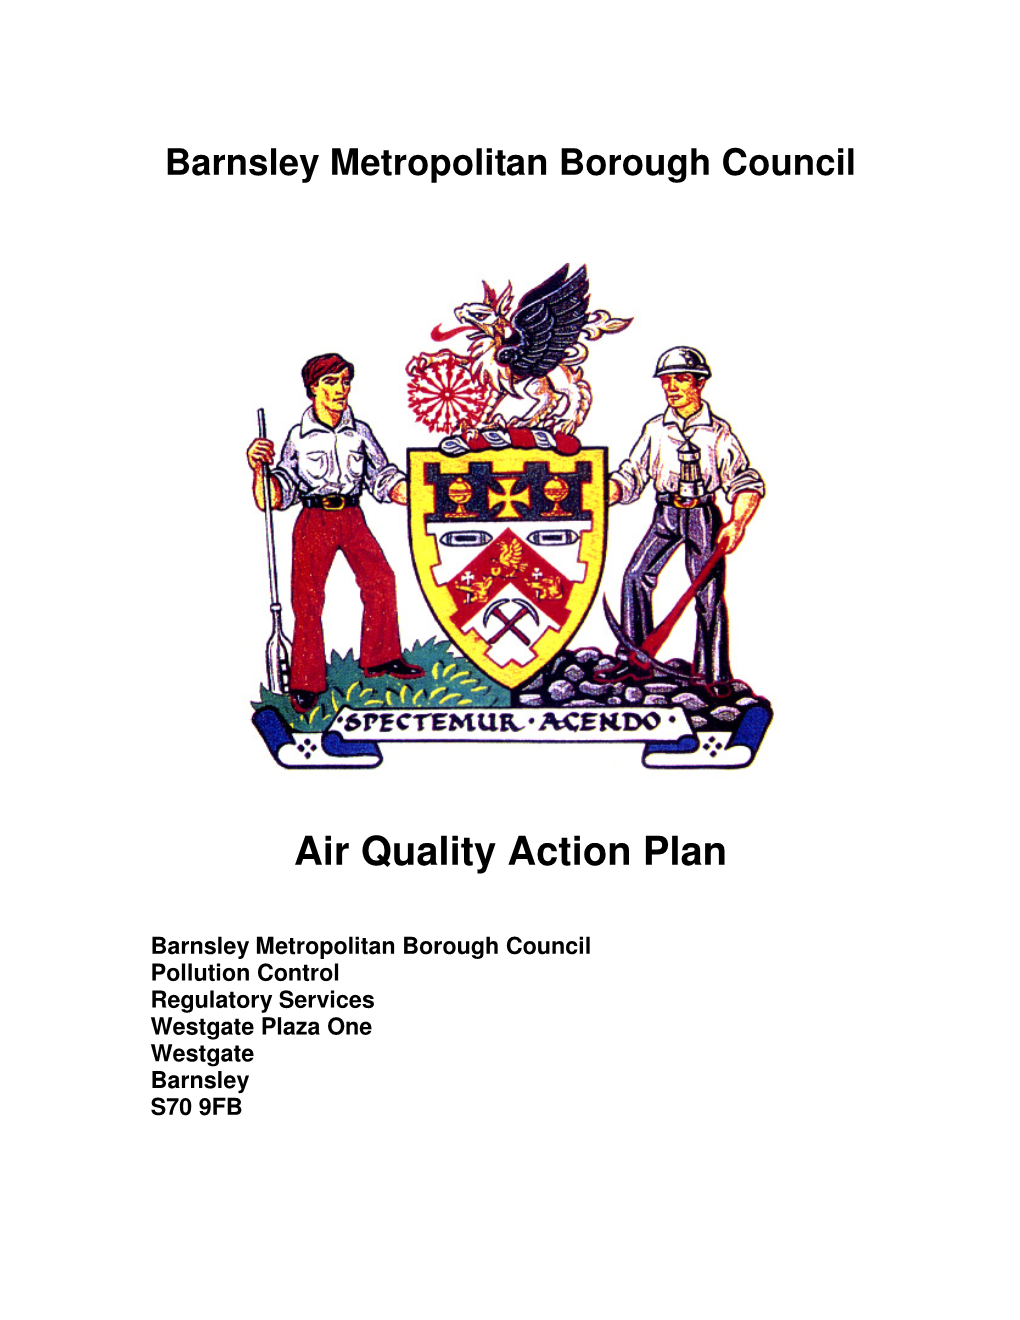 Barnsley MBC Air Quality Action Plan, These Being